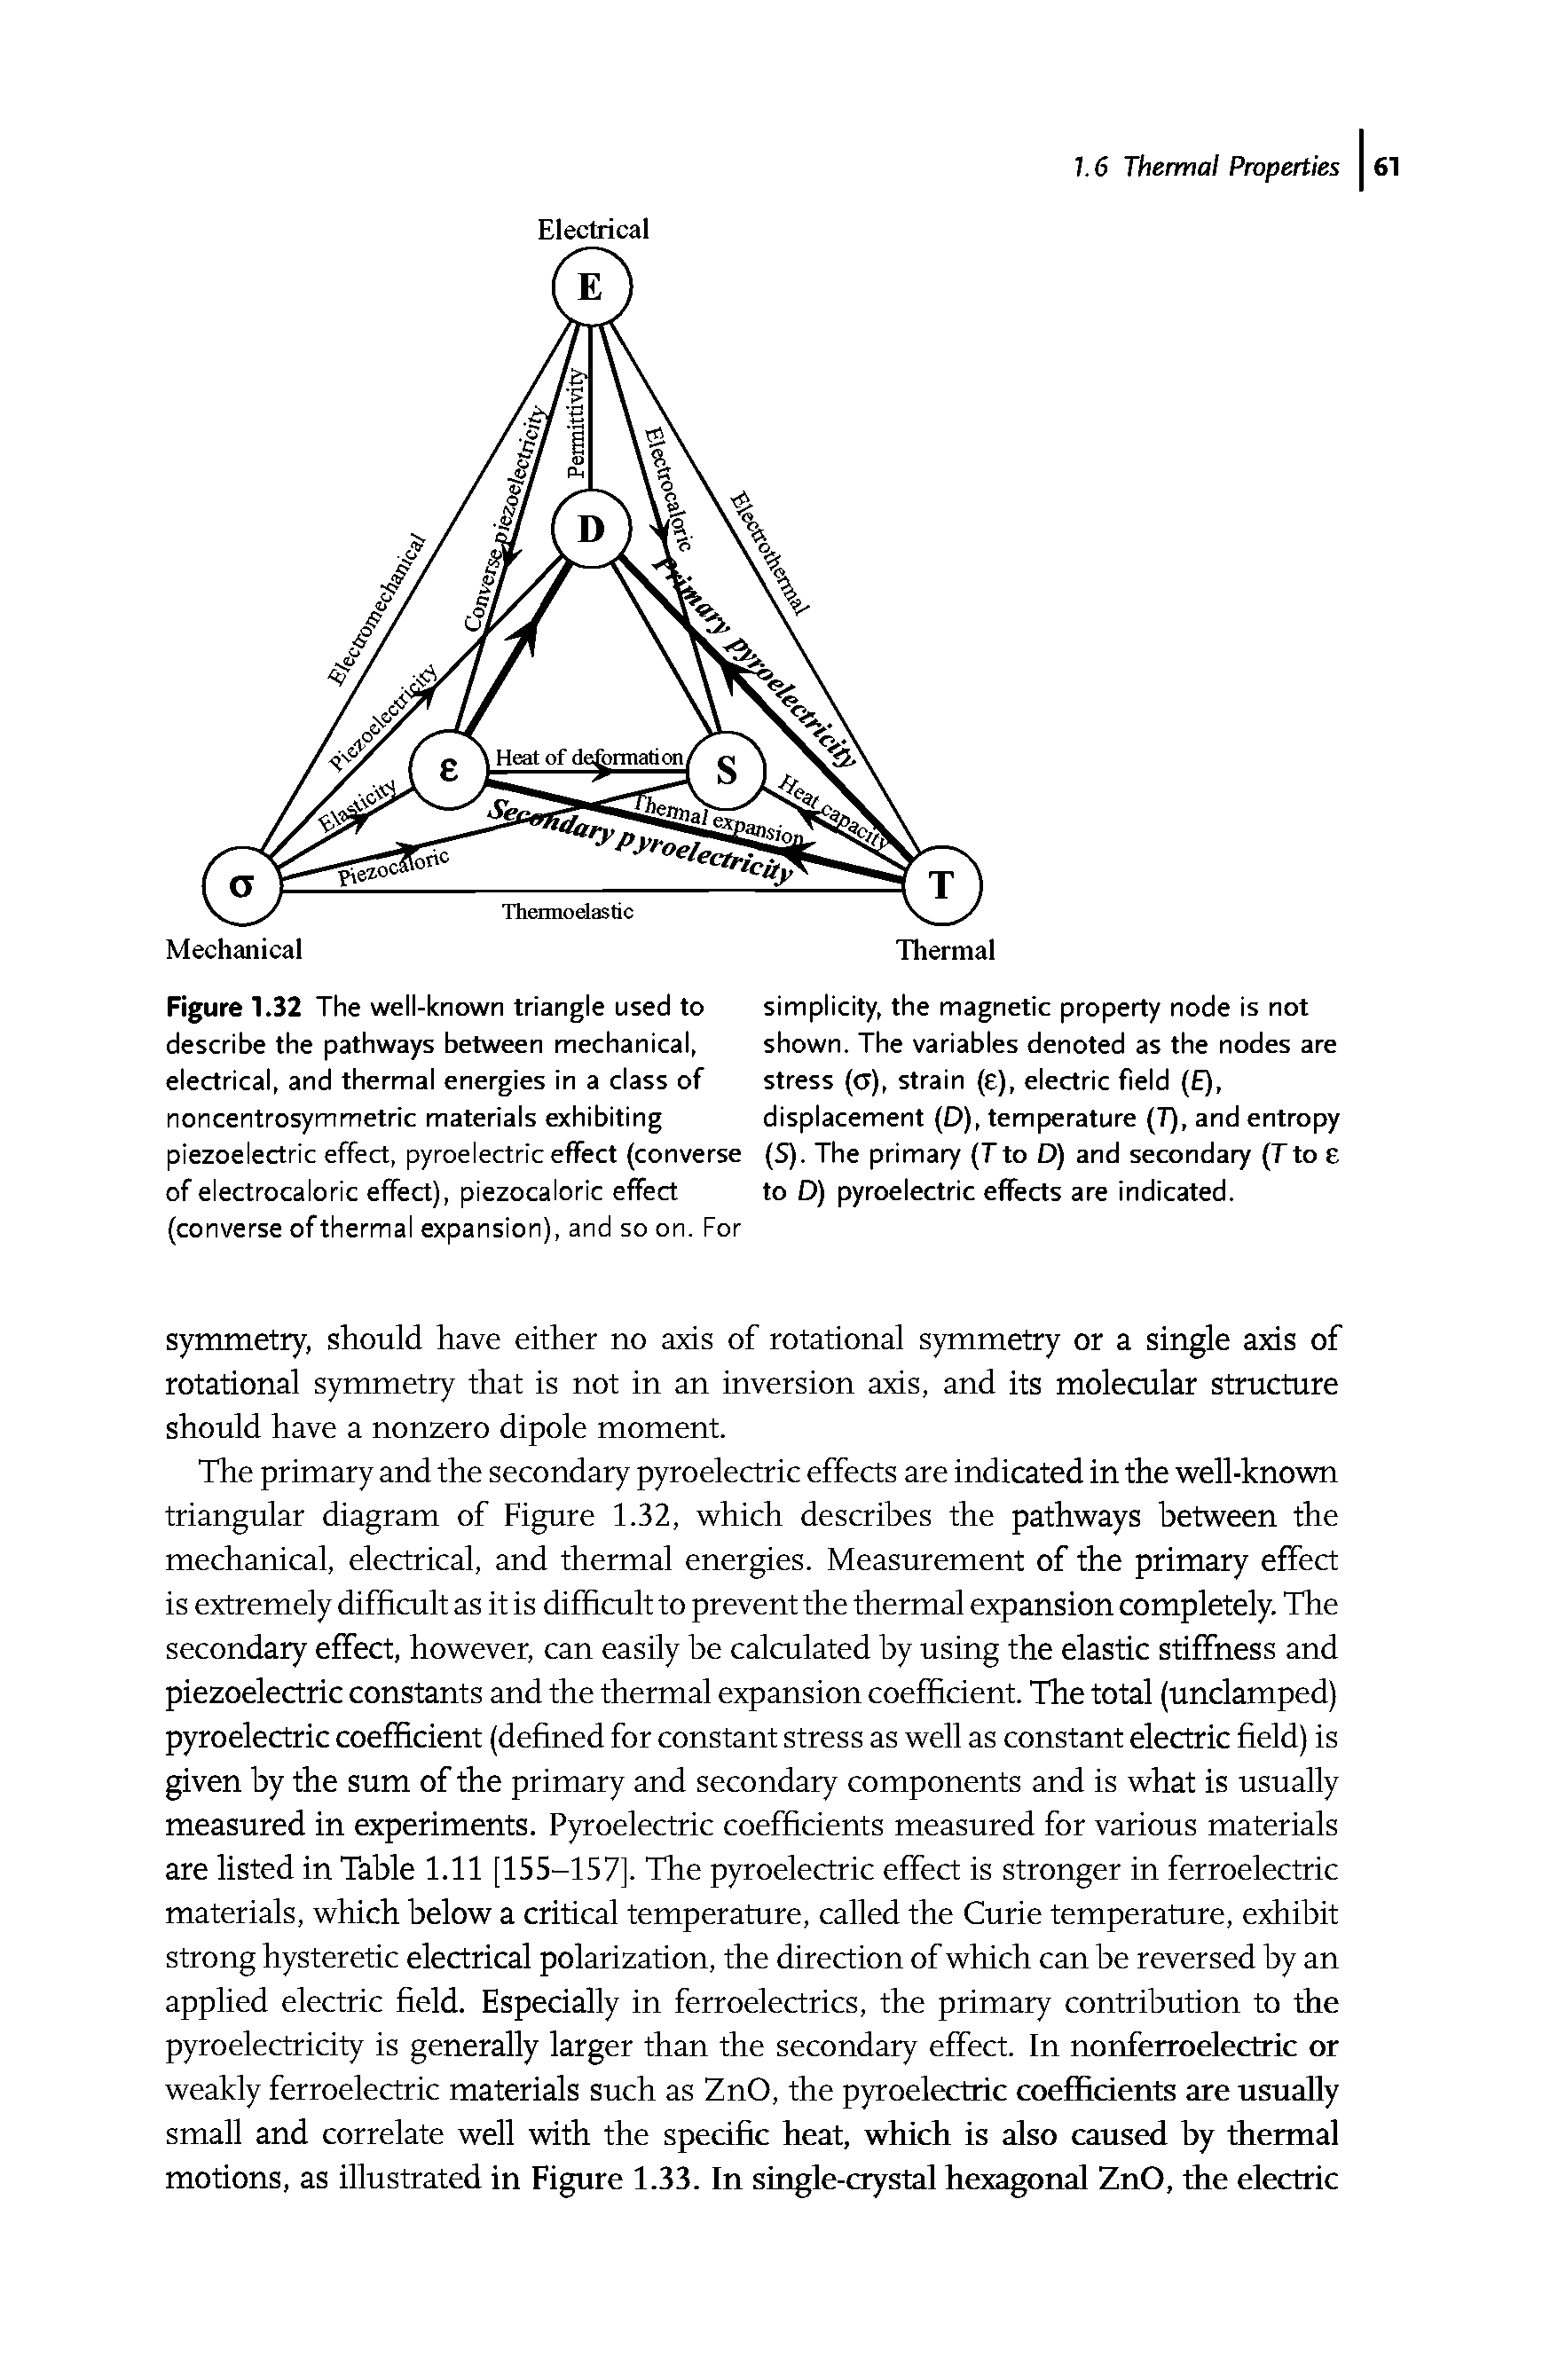 Figure 1.32 The well-known triangle used to describe the pathways between mechanical, electrical, and thermal energies in a class of noncentrosymmetric materials exhibiting piezoelectric effect, pyroelectric effect (converse of electrocaloric effect), piezocaloric effect (converse ofthermal expansion), and so on. For...